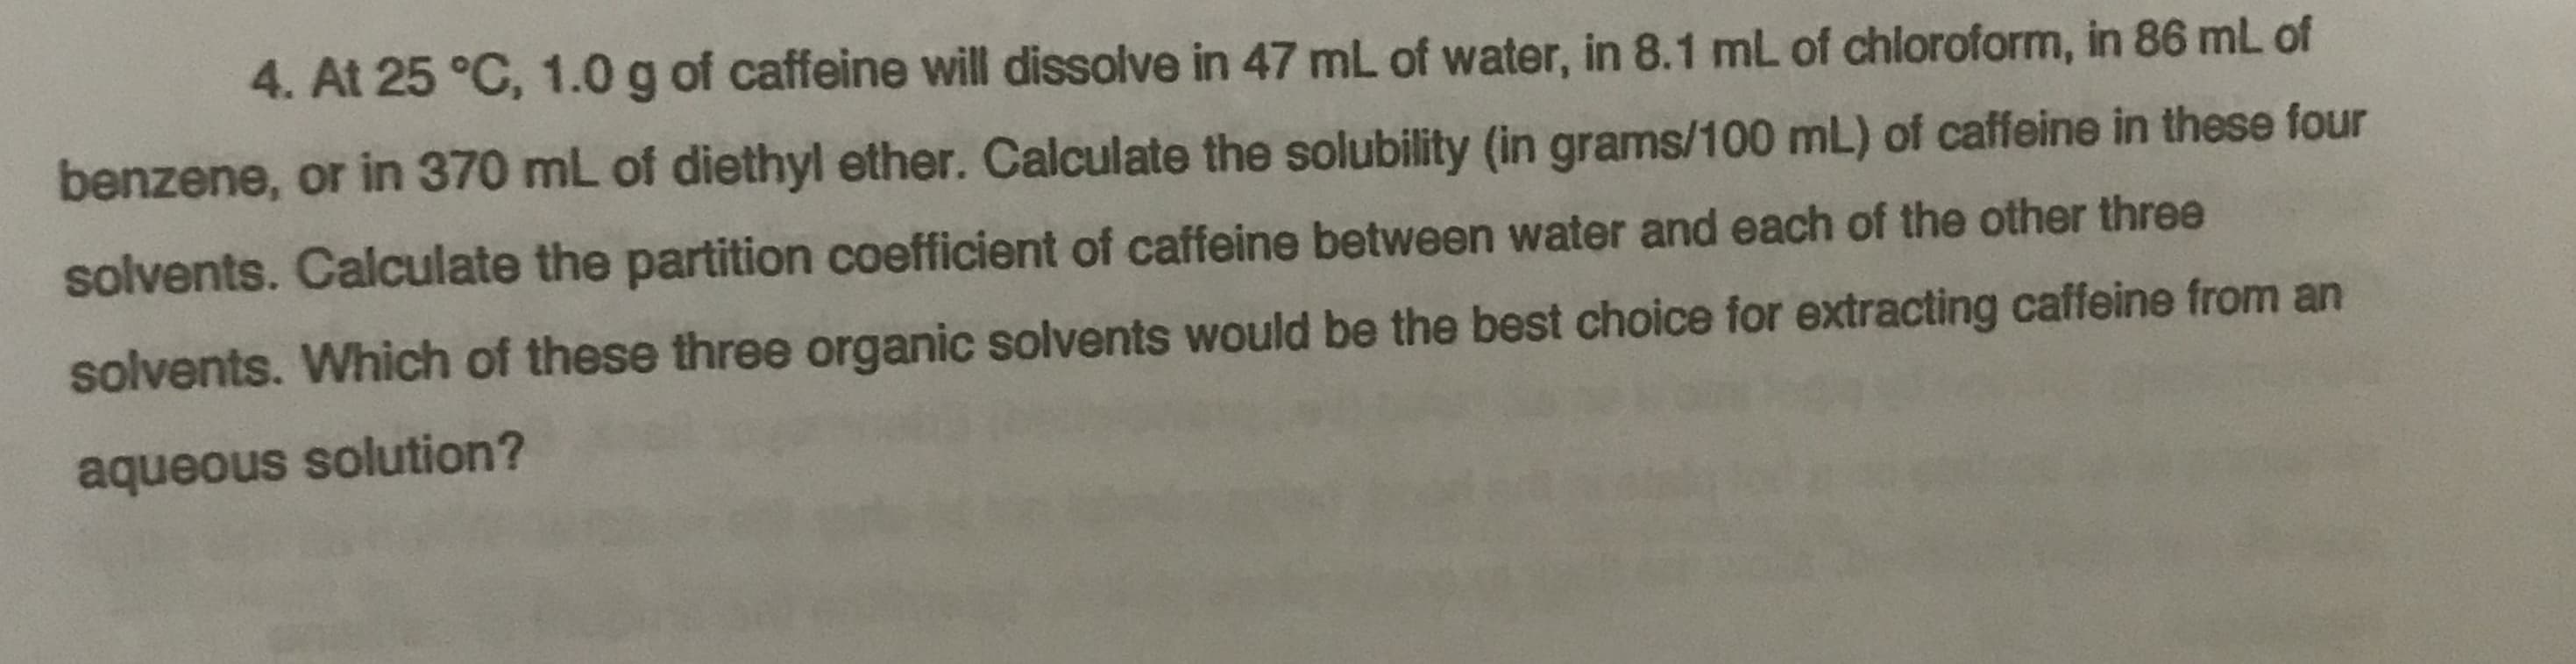 4. At 25 °C, 1.0 g of caffeine will dissolve in 47 mL of water, in 8.1 mL of chloroform, in 86 mL of
benzene, or in 370 mL of diethyl ether. Calculate the solubility (in grams/100 mL) of caffeine in these four
solvents. Calculate the partition coefficient of caffeine between water and each of the other three
solvents. Which of these three organic solvents would be the best choice for extracting caffeine from an
aqueous solution?
